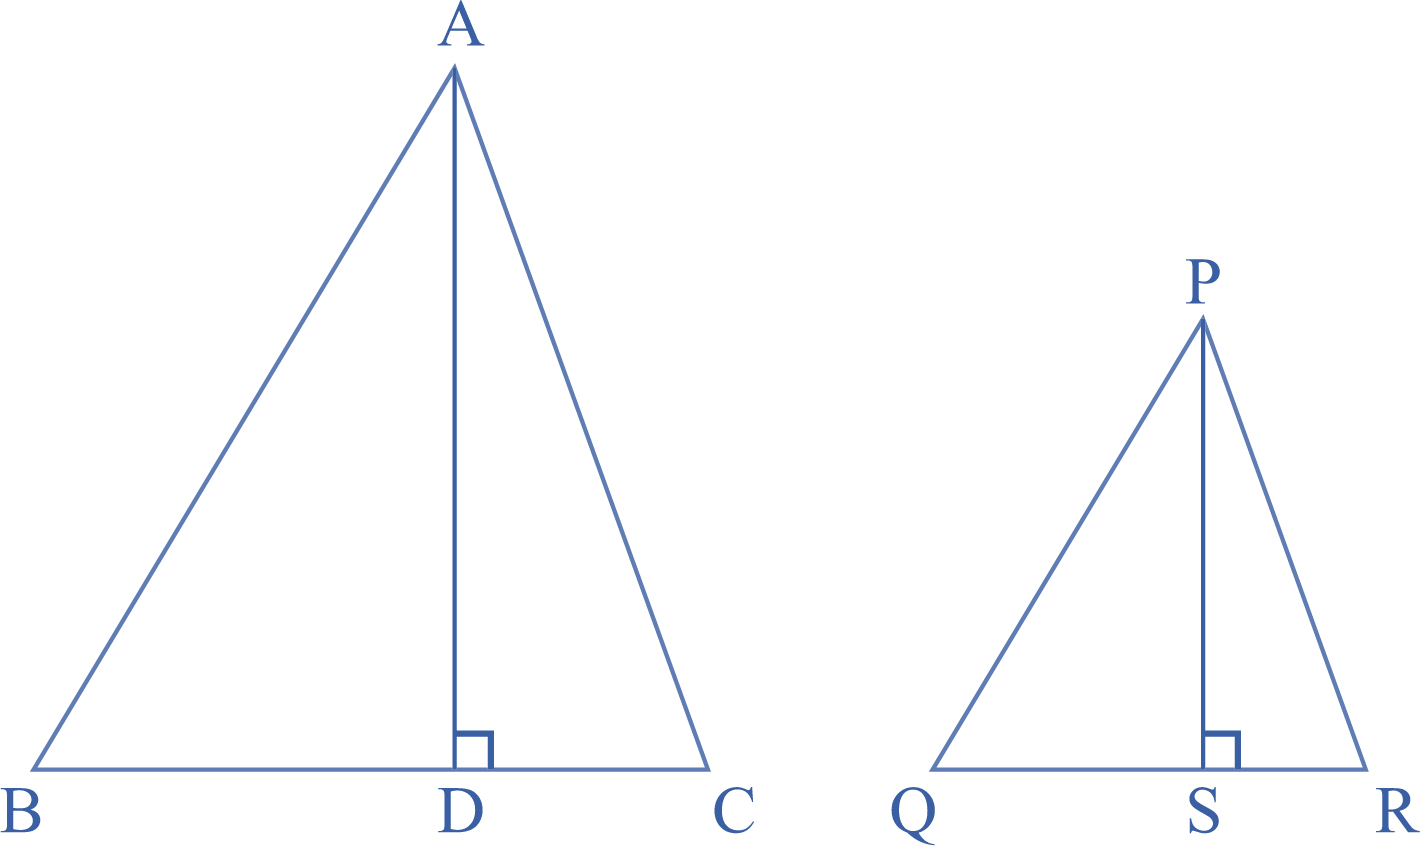 Areas of similar Triangles